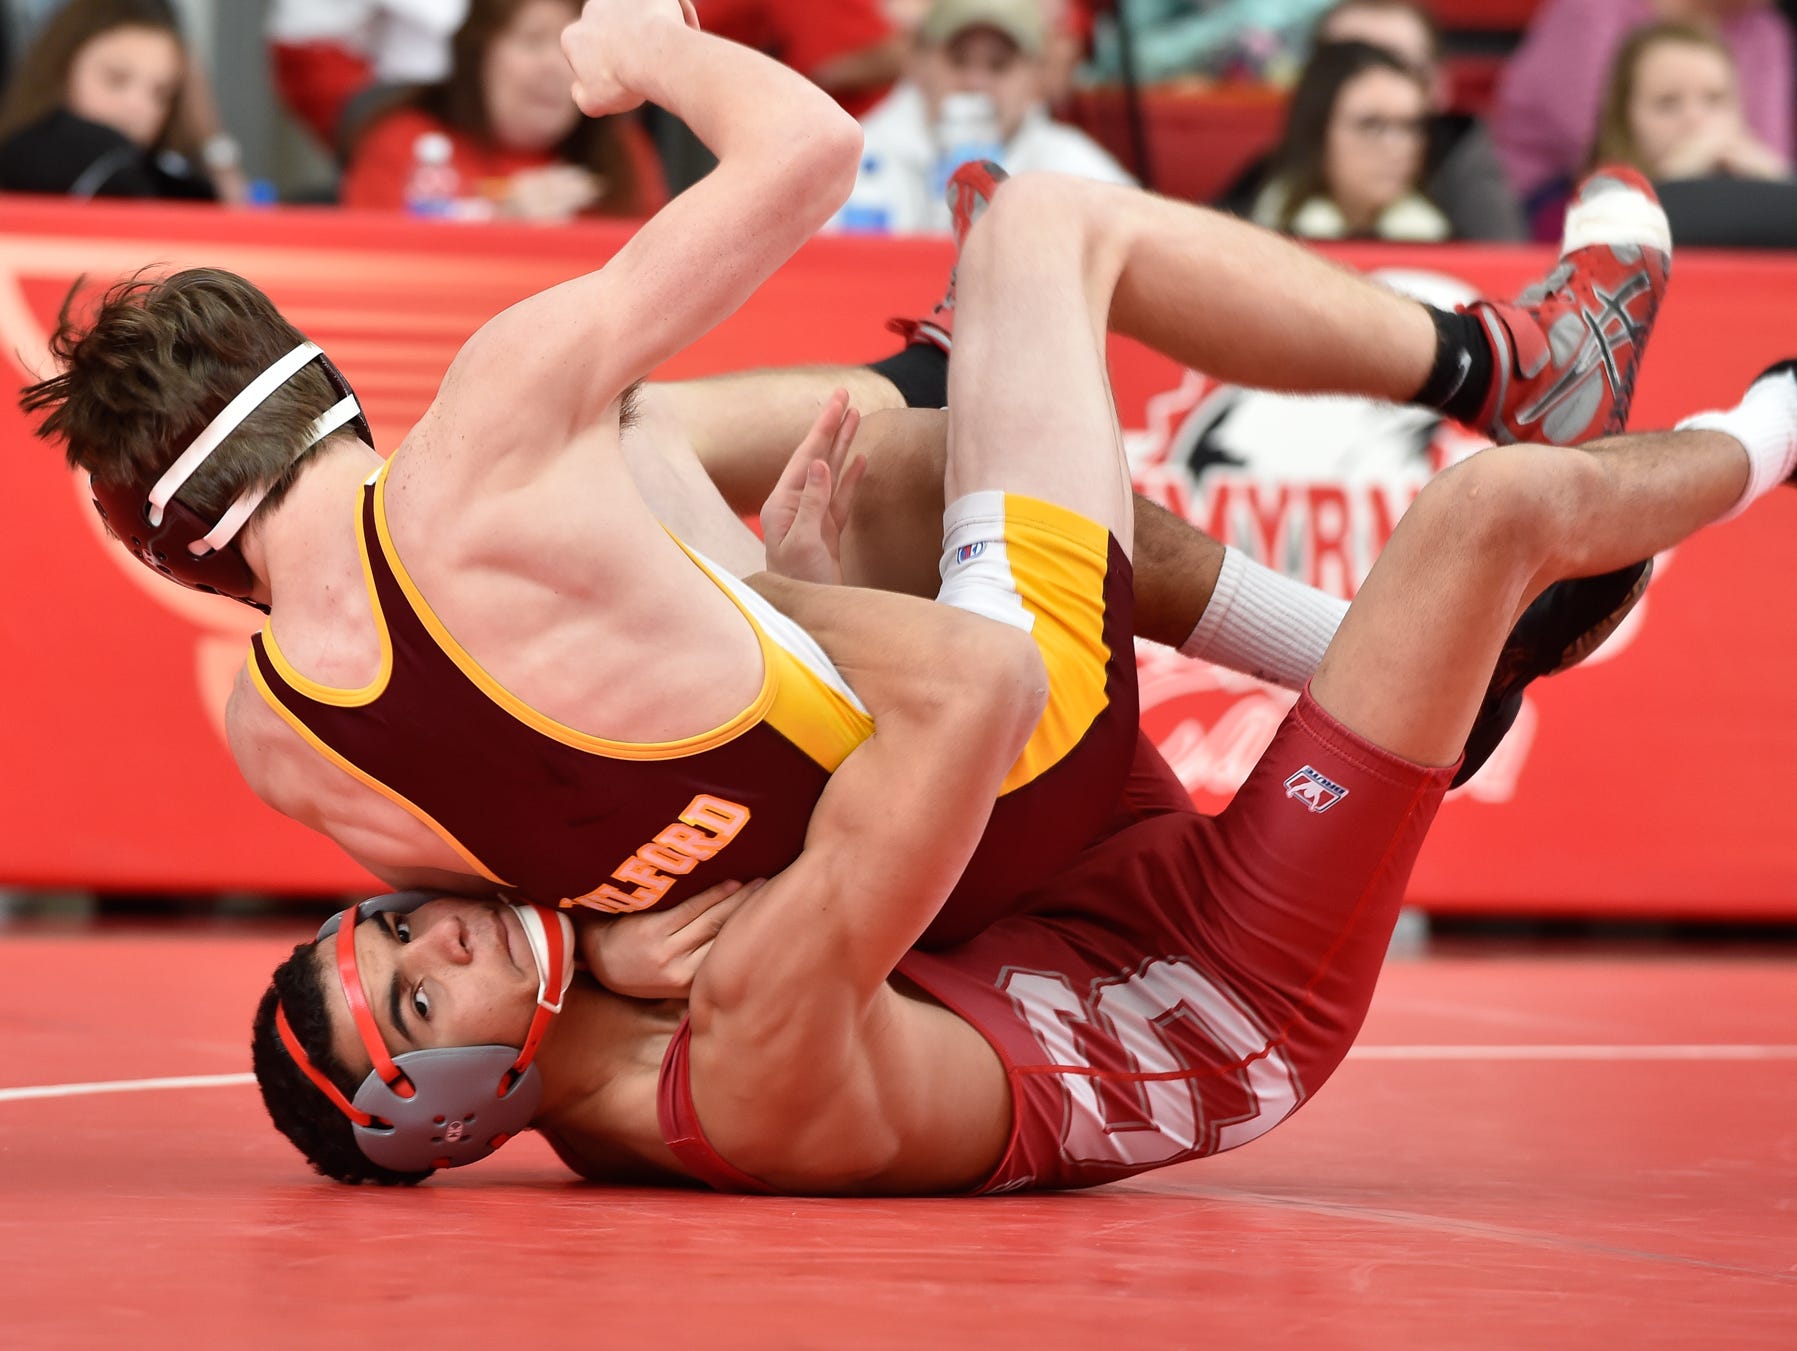 Smyrna's Nate Bryant rolls and brings Milford's Adam Funkhouser to the mat in the 138 pound match at Smyrna High School.